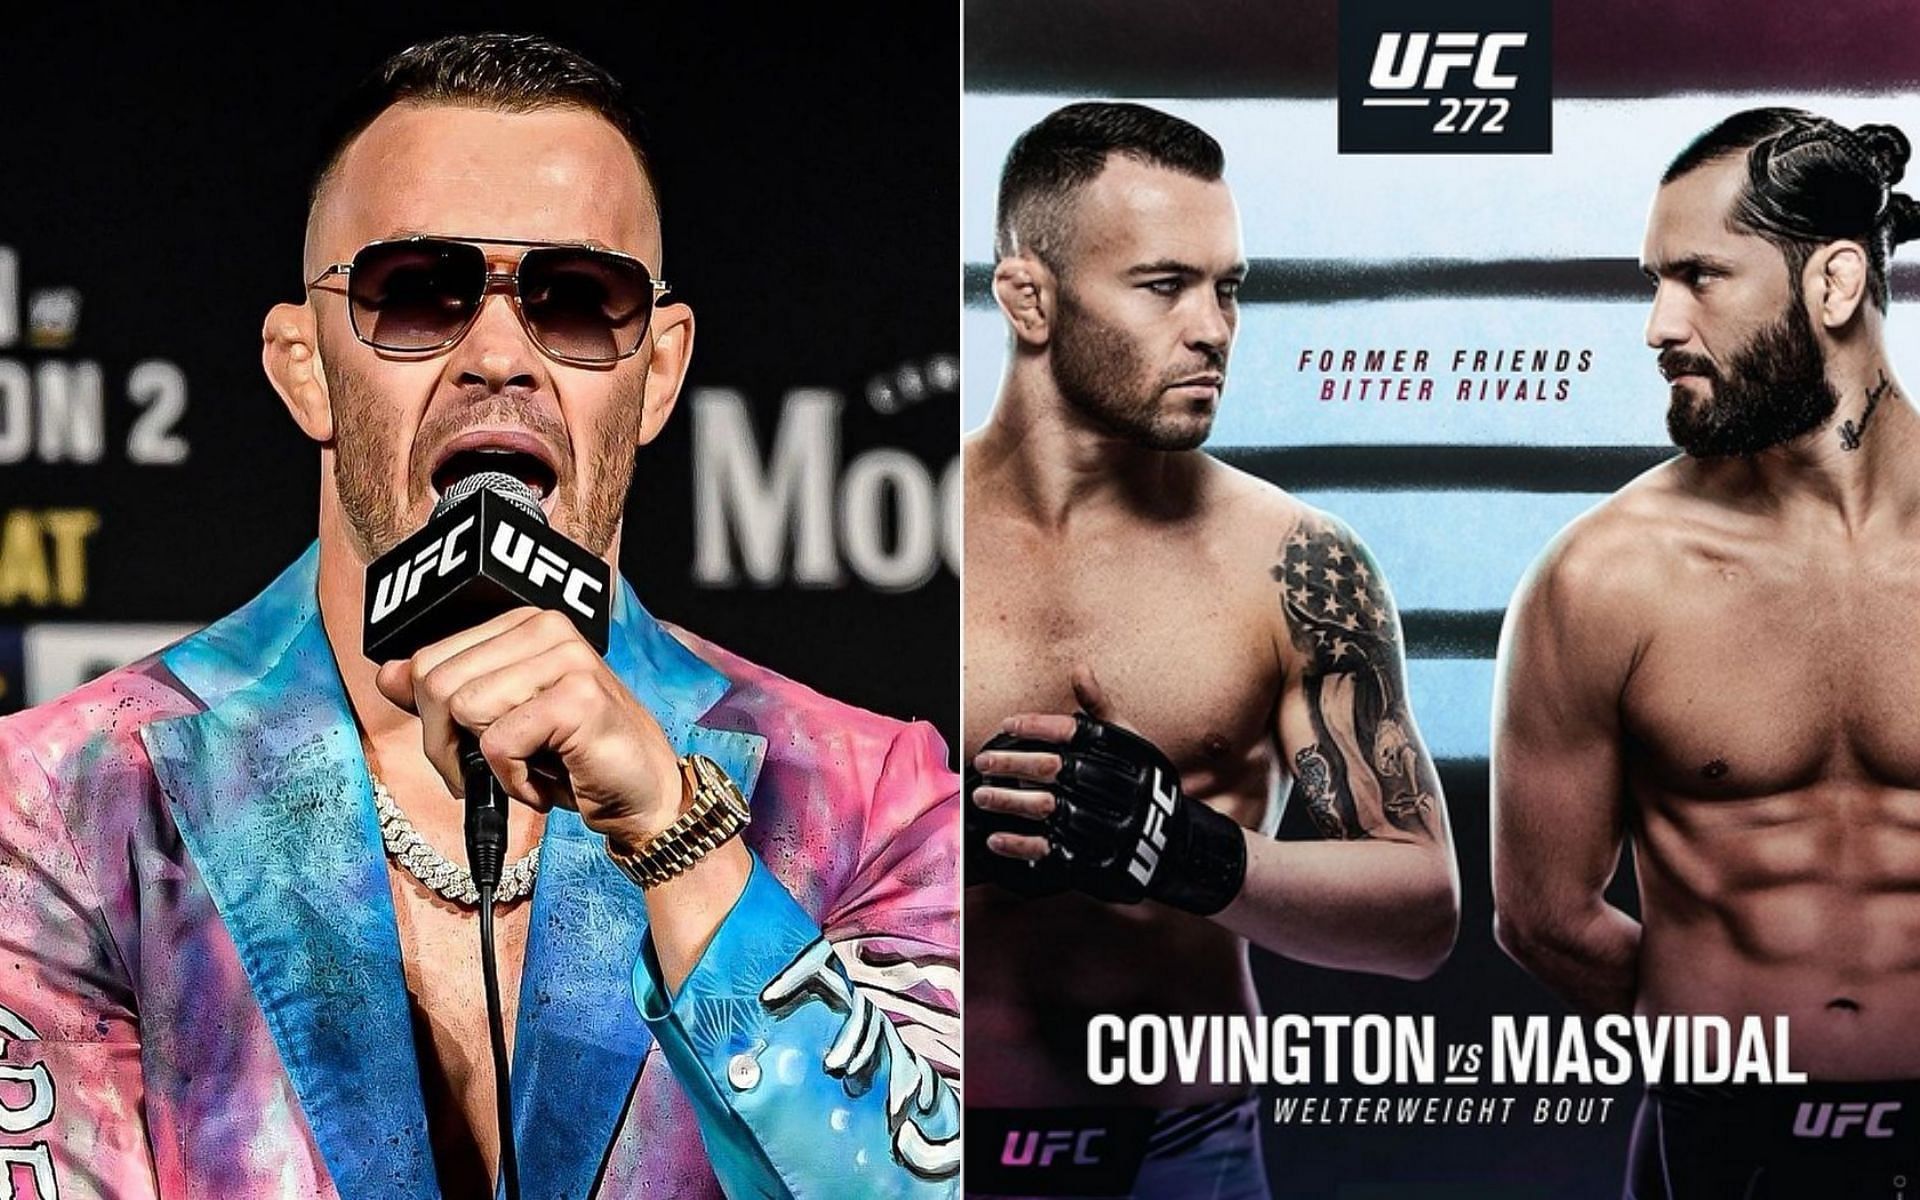 Colby Covington will face Jorge Masvidal at UFC 272